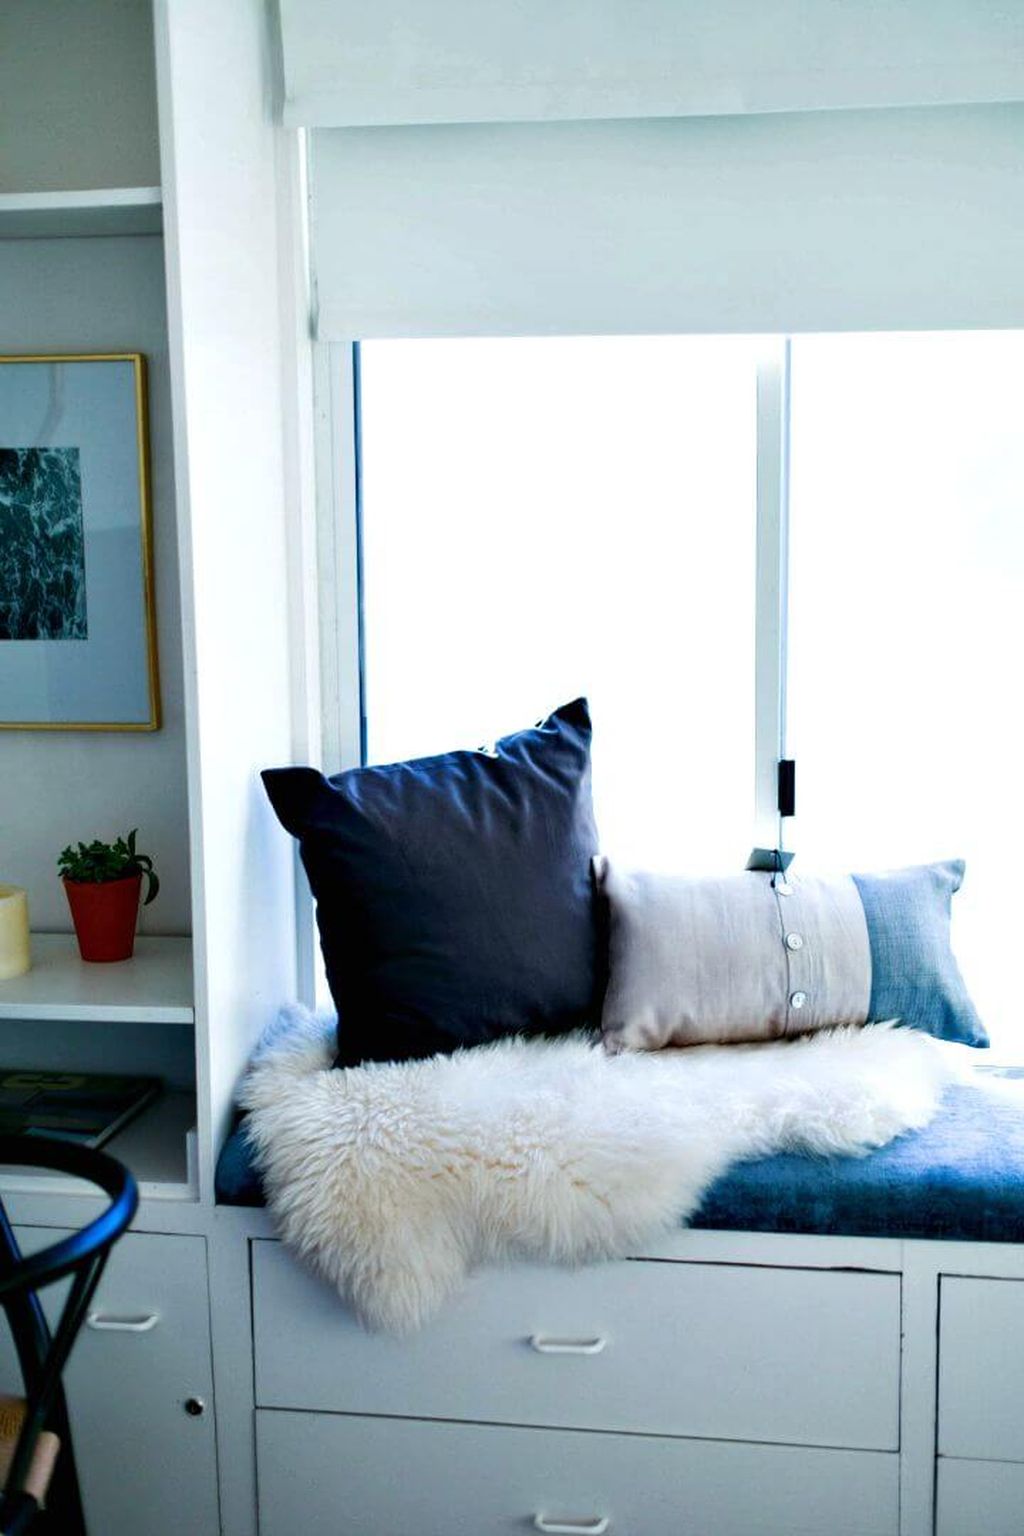 8 Cushions or Pillow Ideas To Upgrade Your Seating - Talkdecor